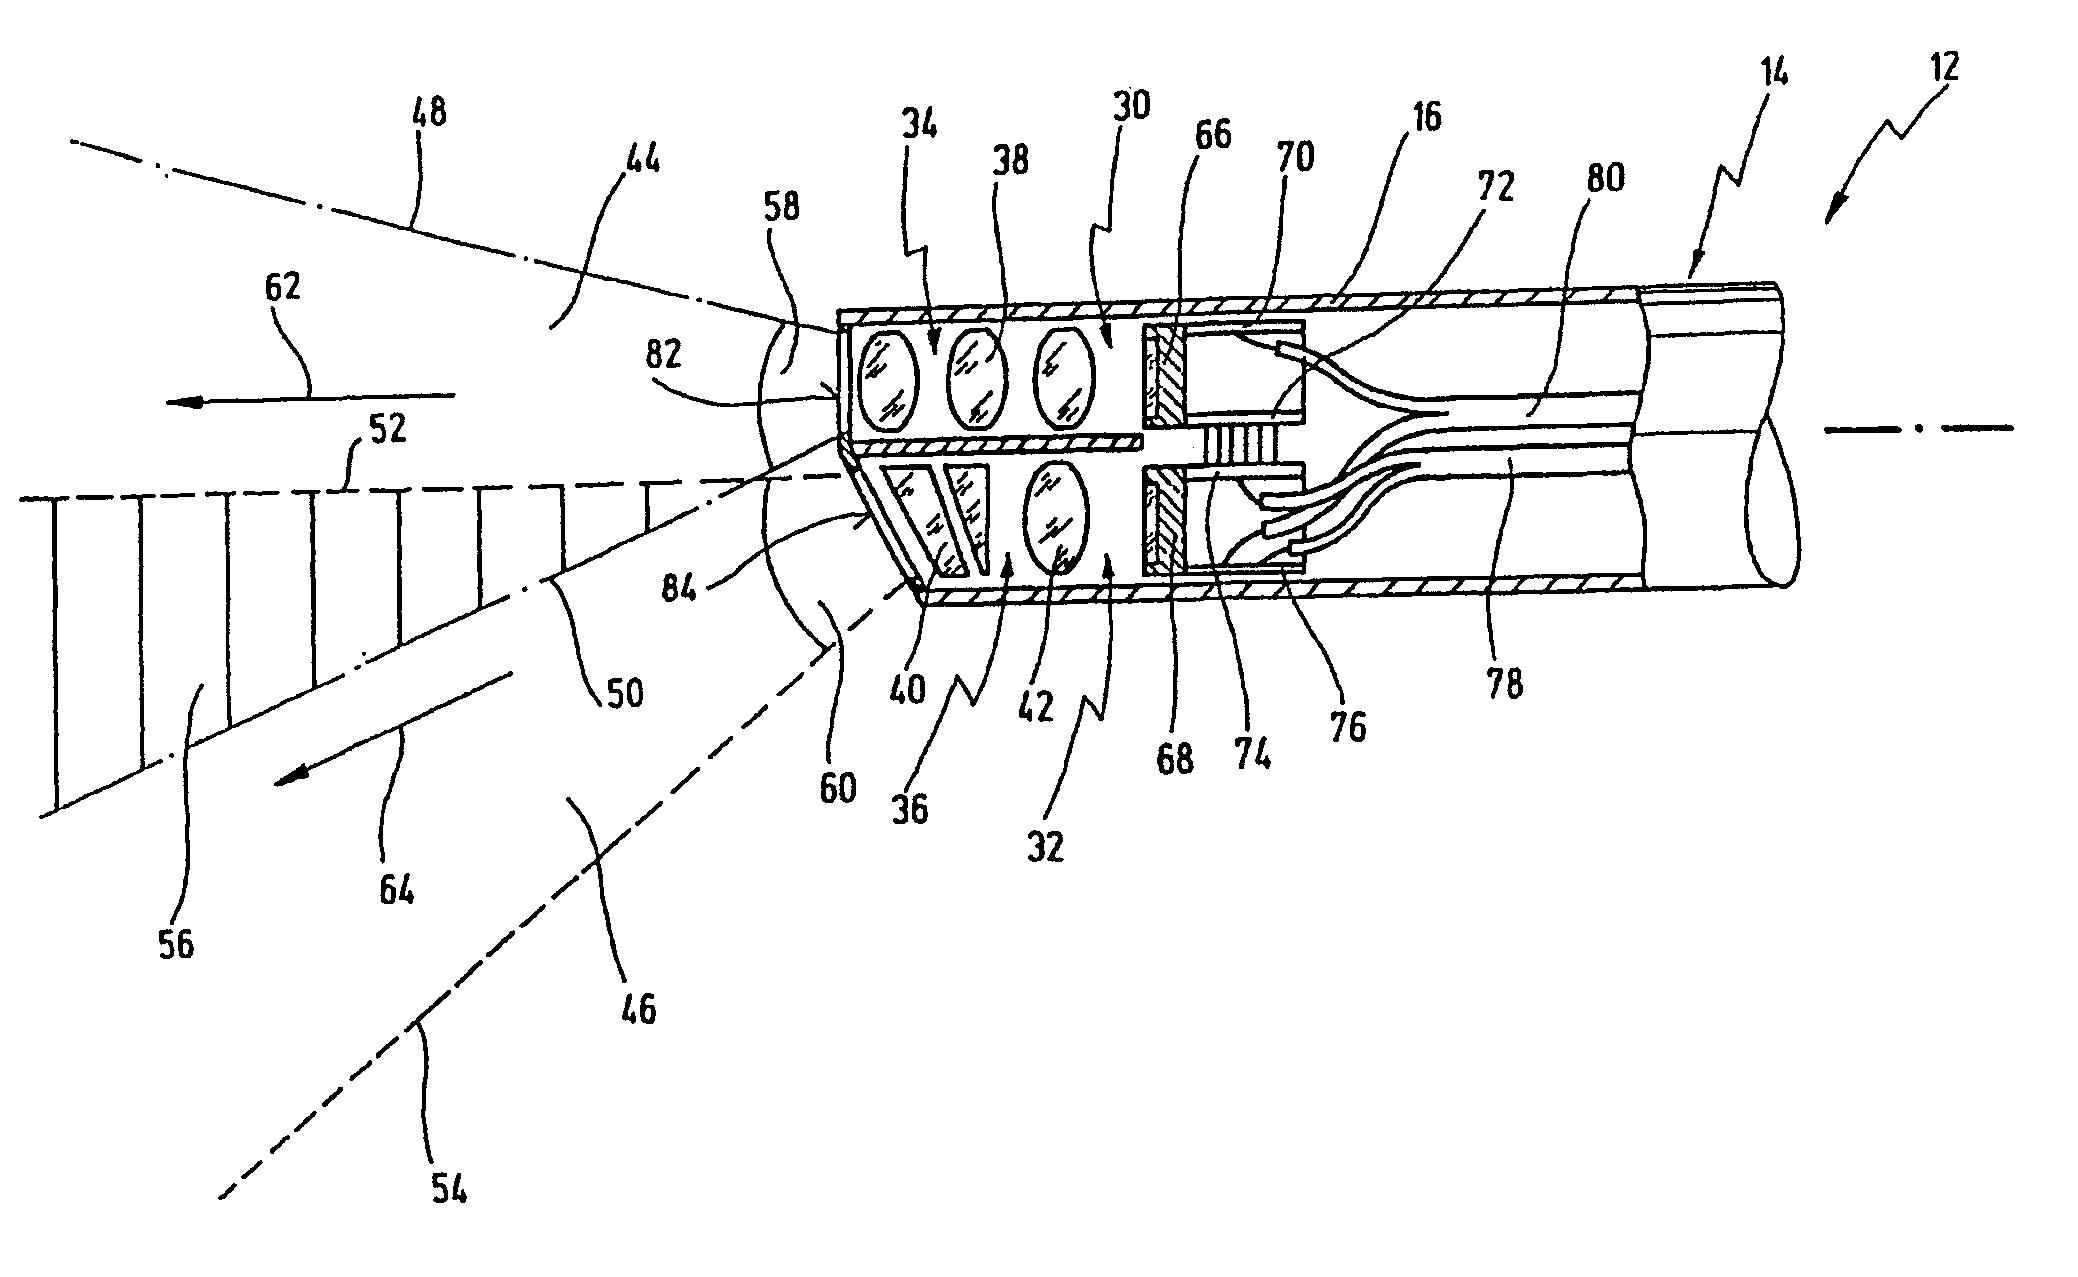 Endoscopic visualization apparatus with different imaging systems